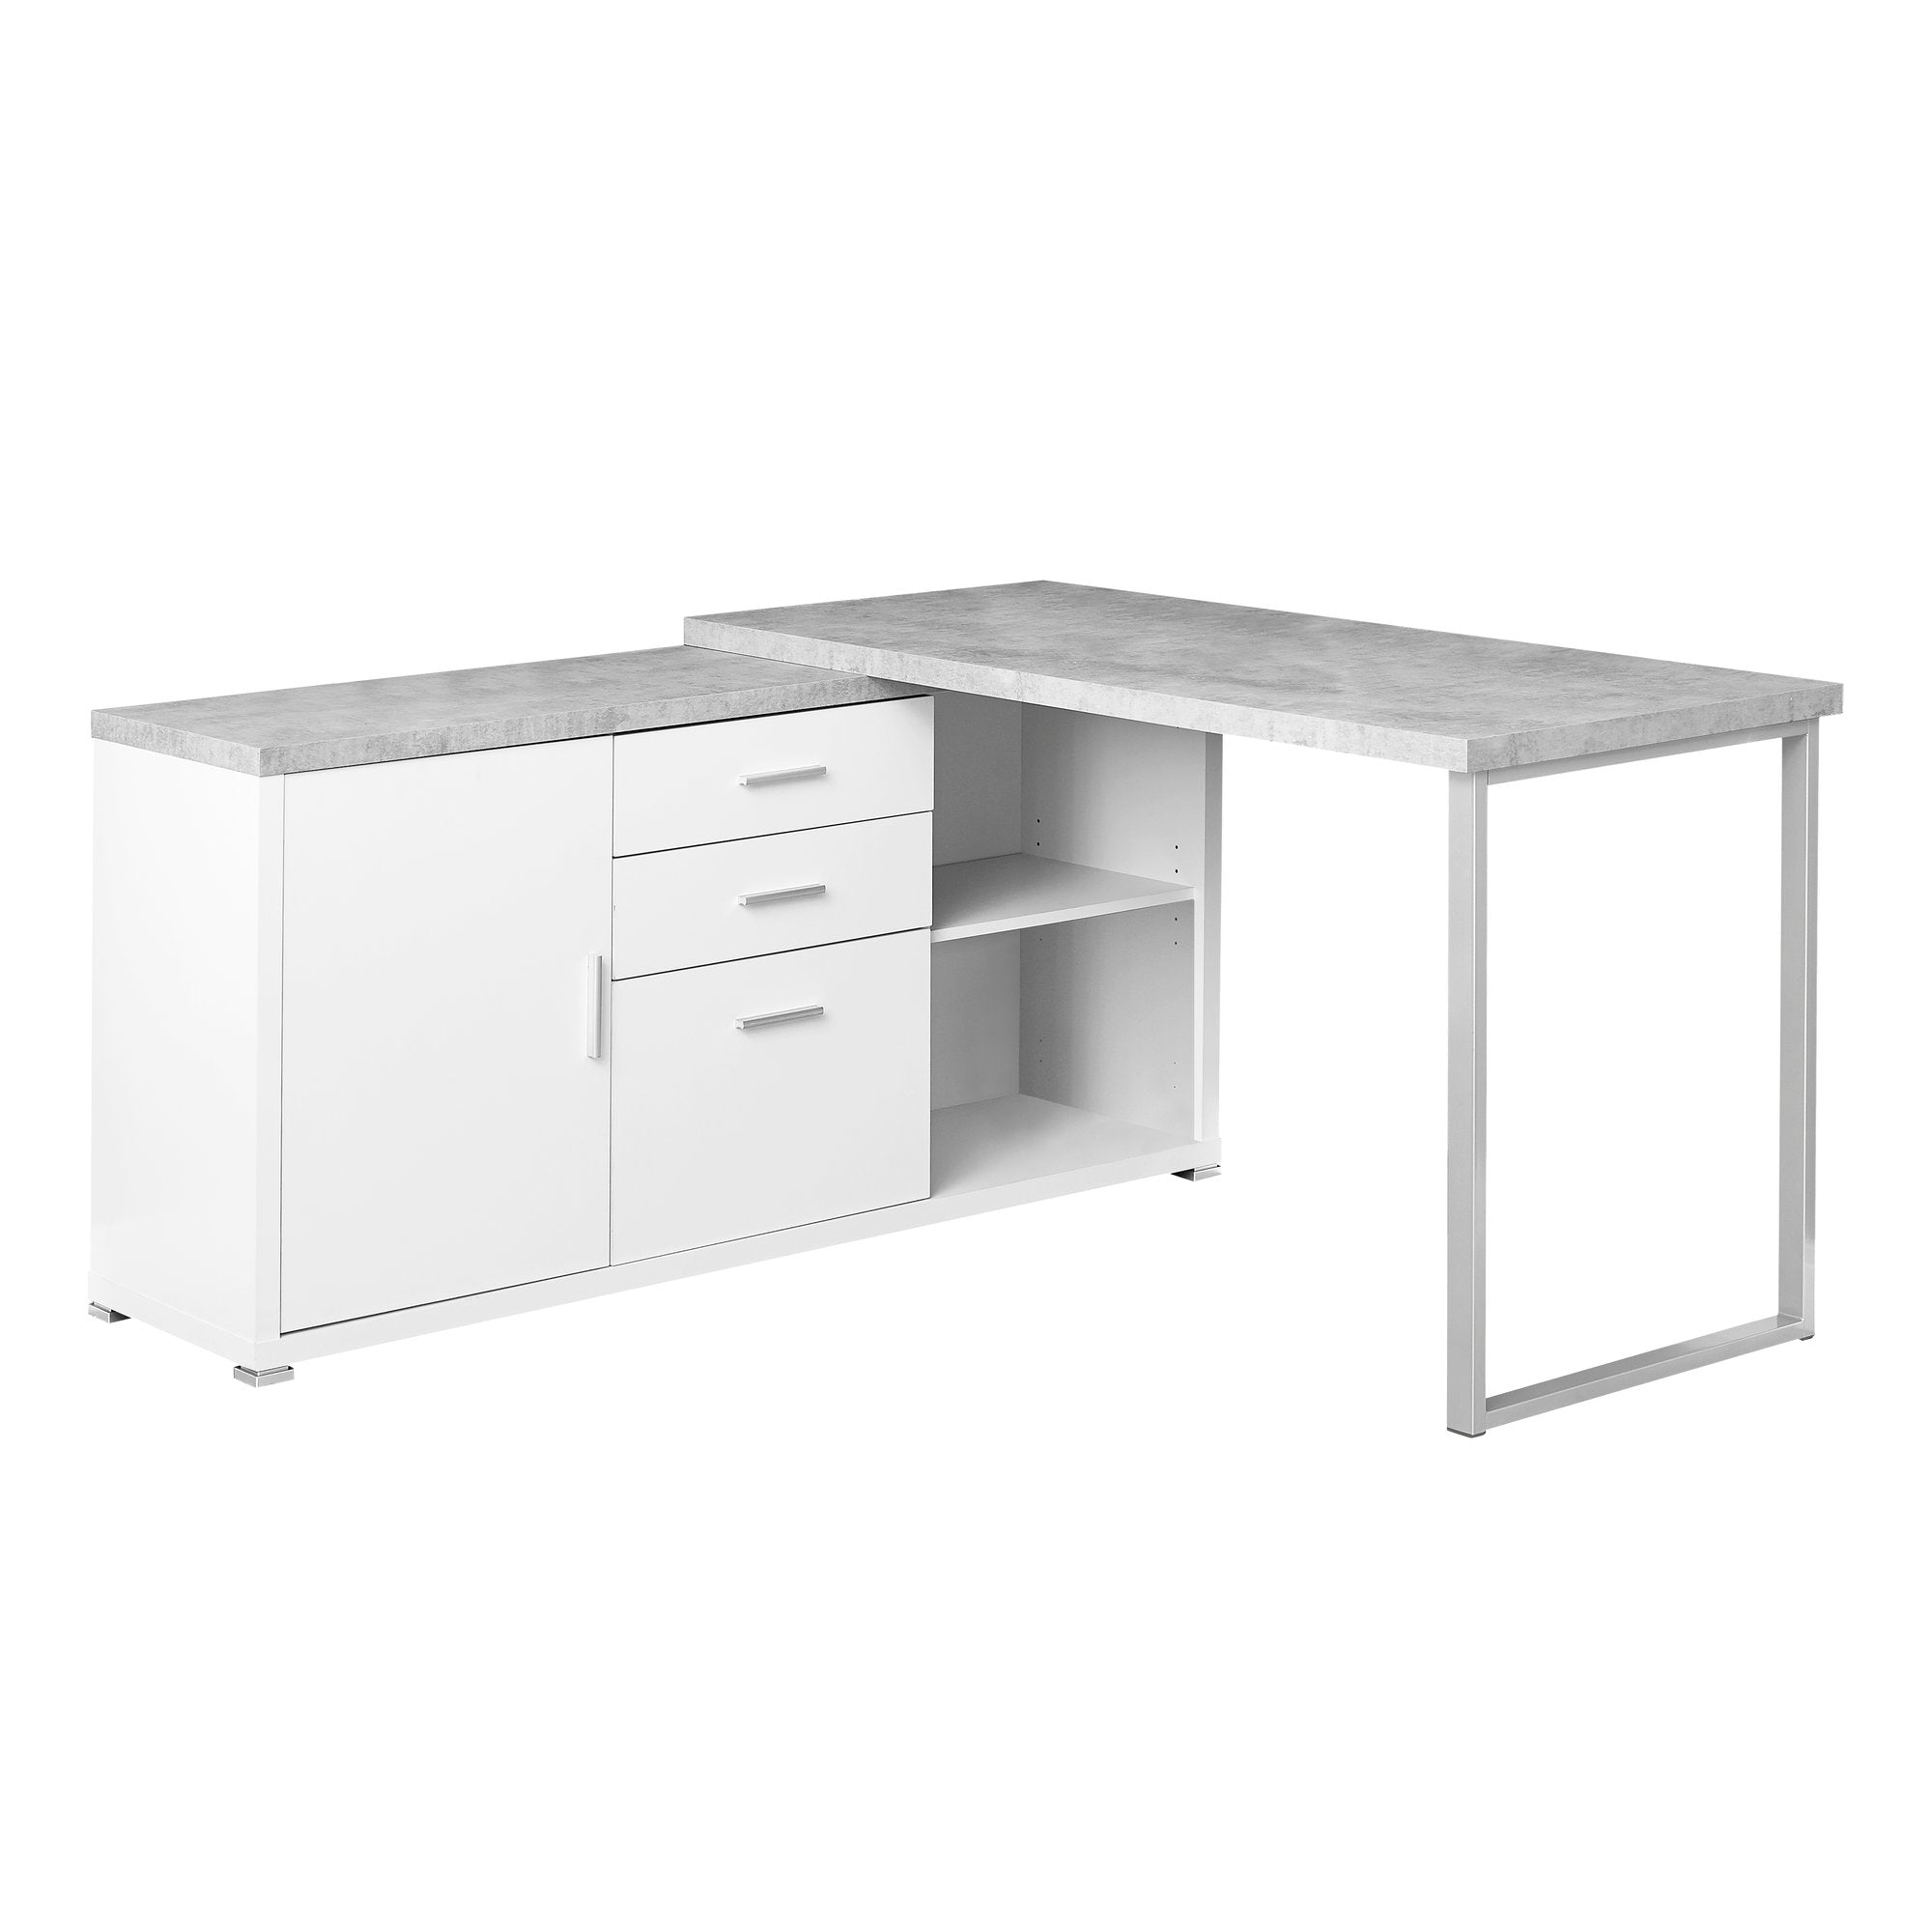 COMPUTER DESK - 60"L / DARK TAUPE LEFT OR RIGHT FACING